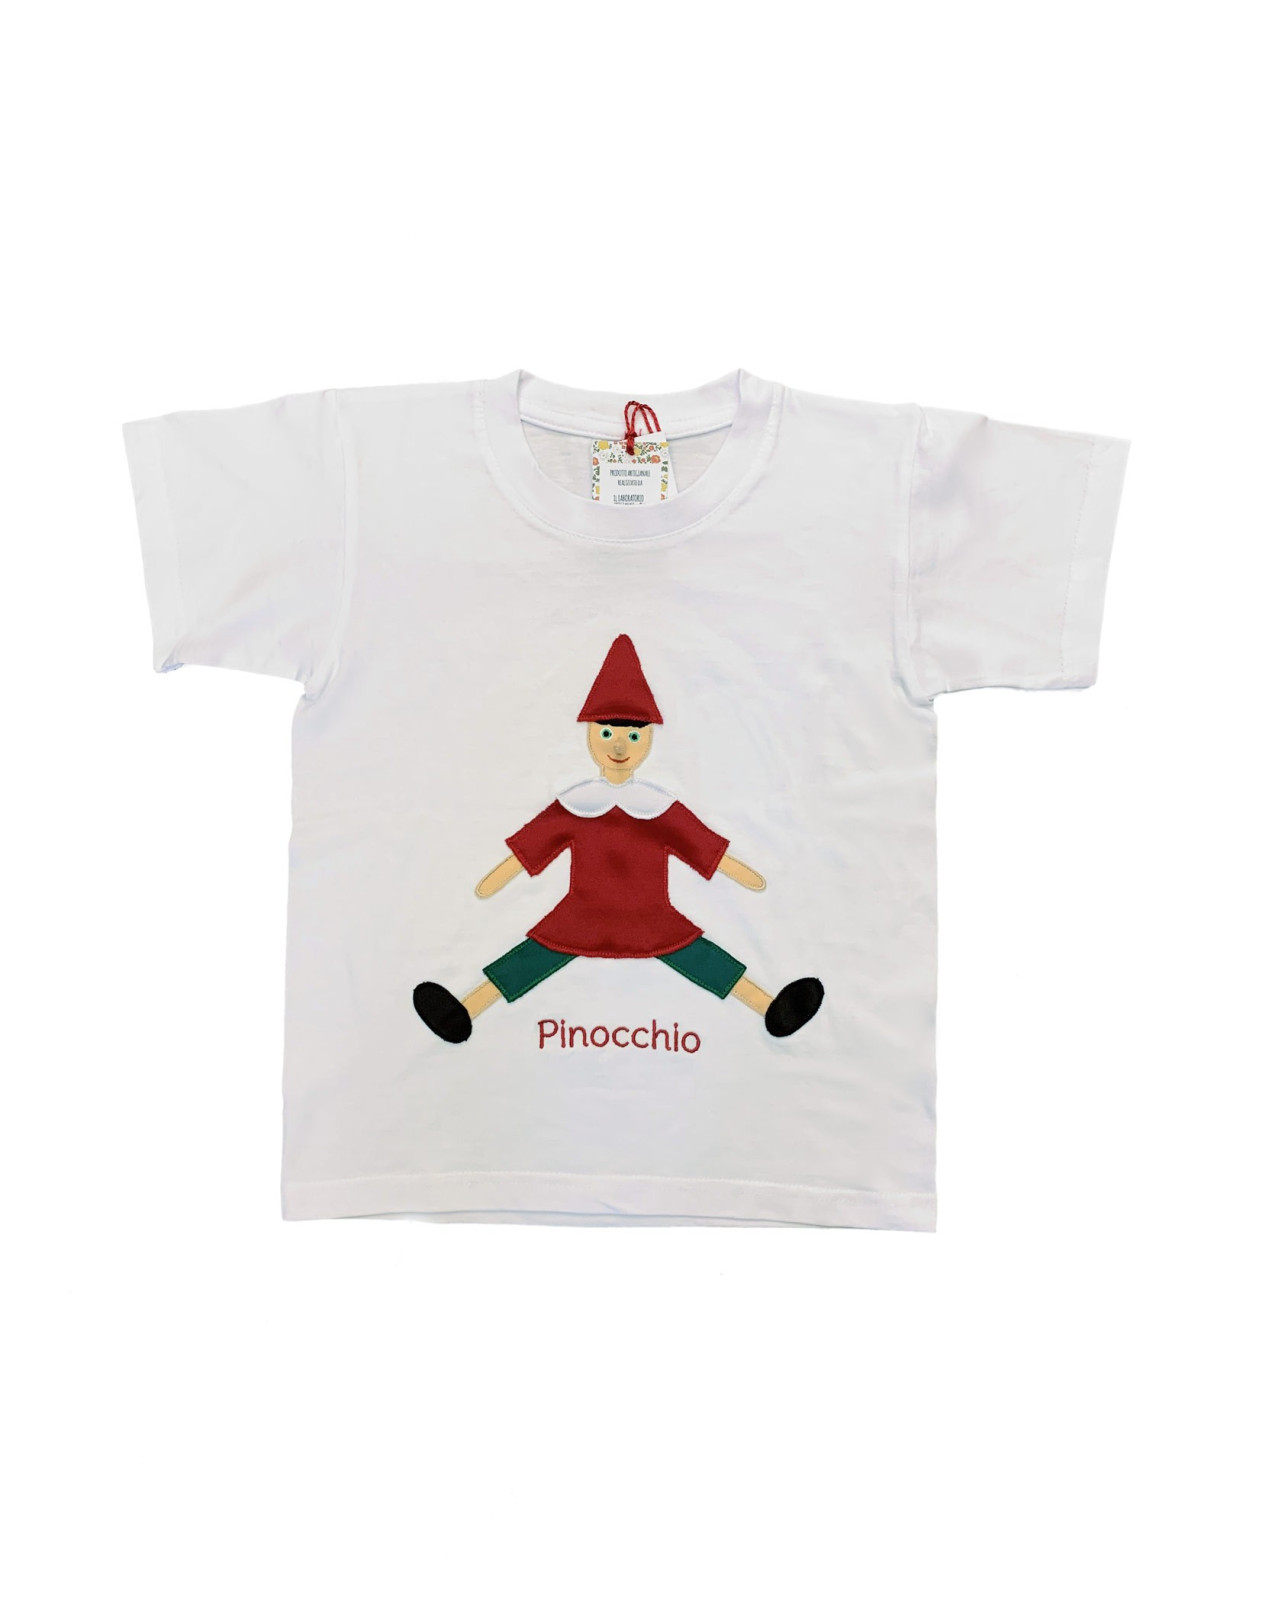 Pinocchio T-shirt hand made in Italy